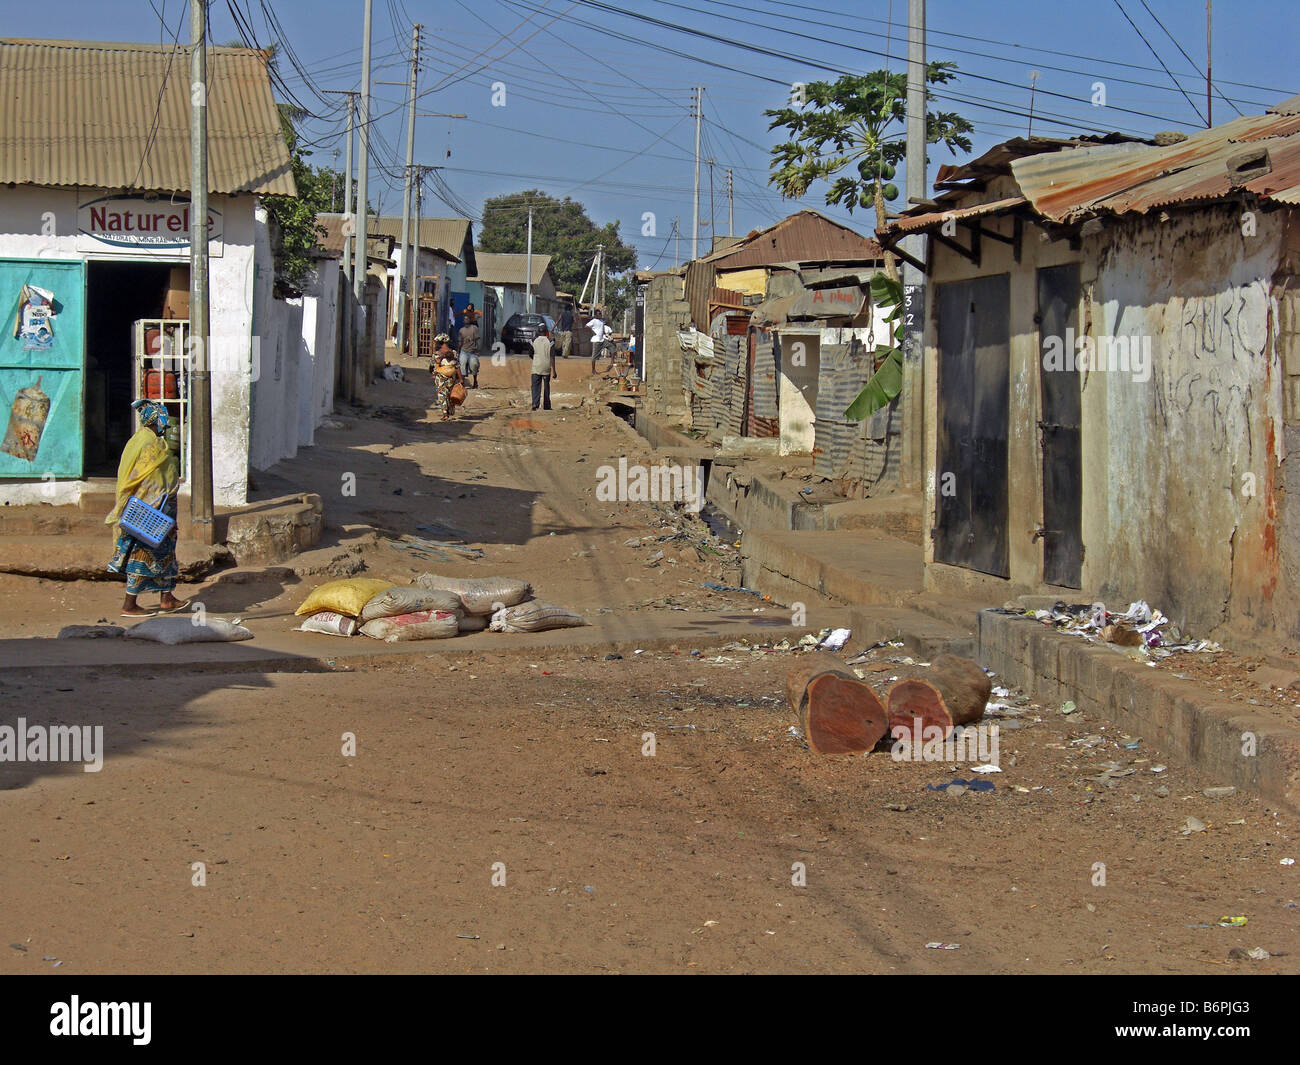 The back streets of Bakau, in The Gambia West Africa. Stock Photo